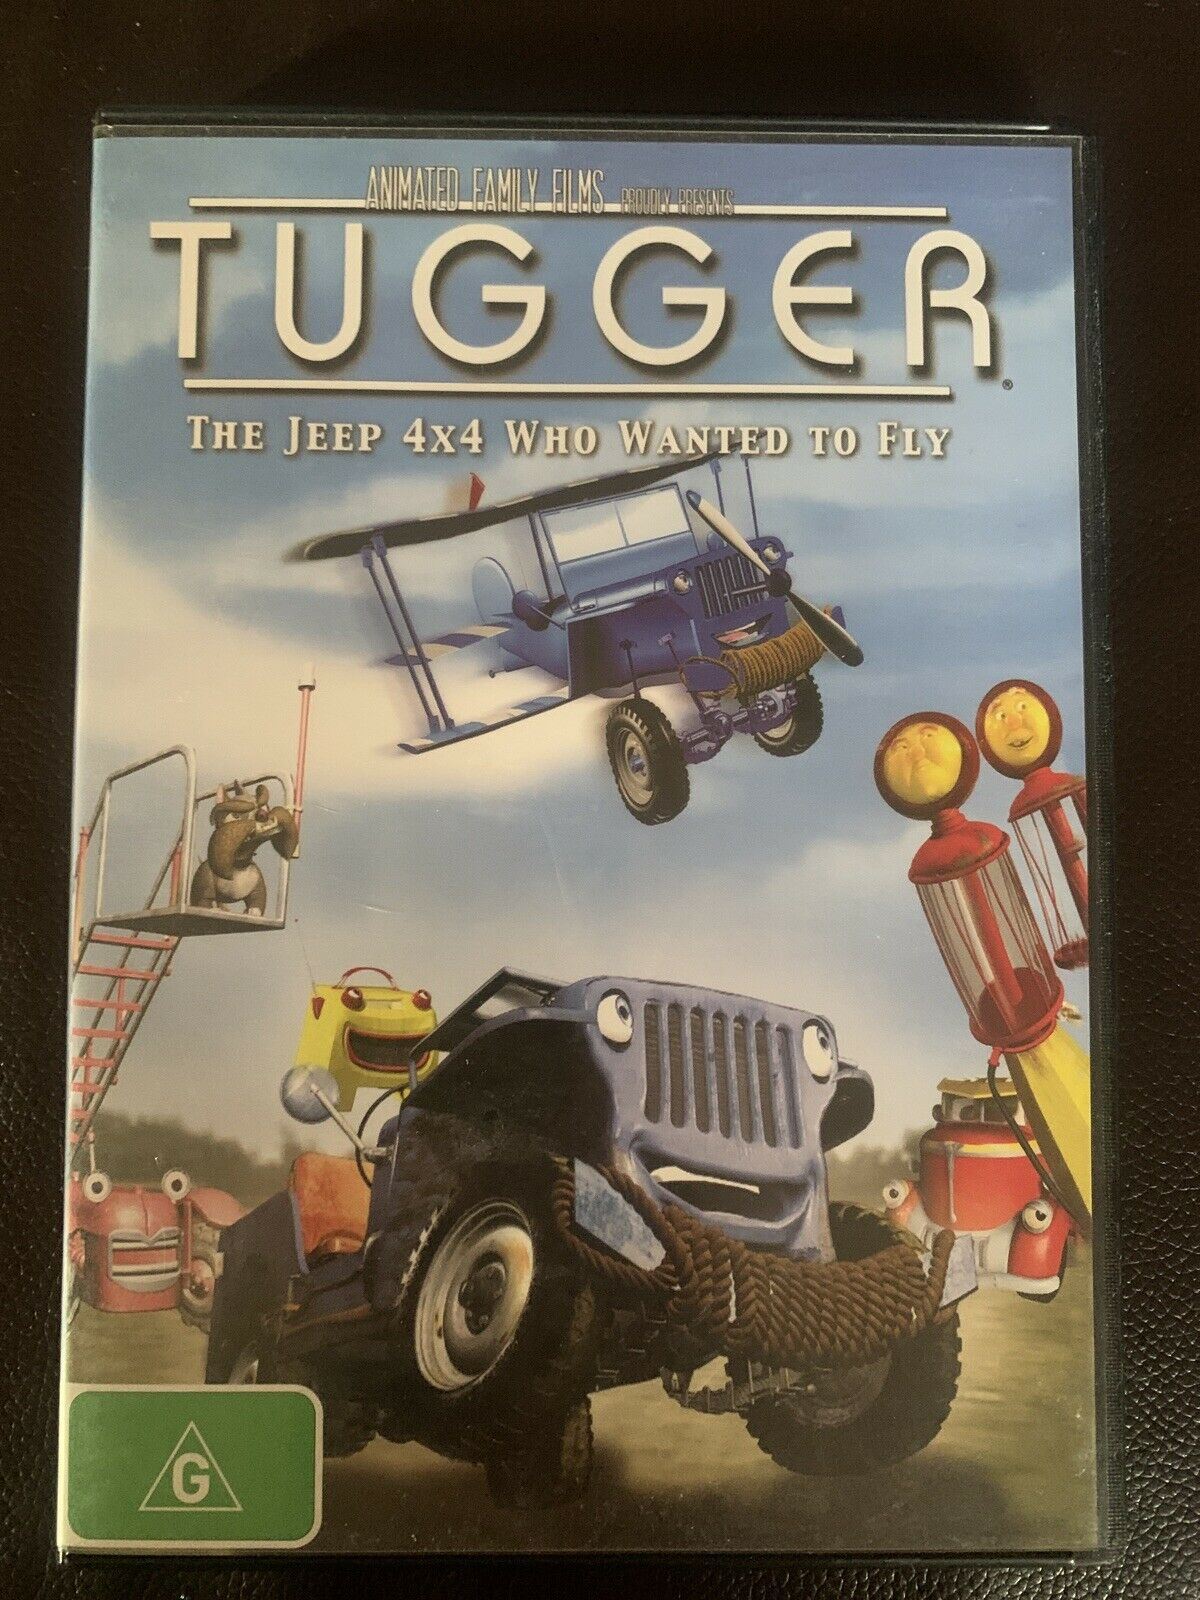 Tugger: The Jeep 4x4 Who Wanted to Fly DVD Region 4